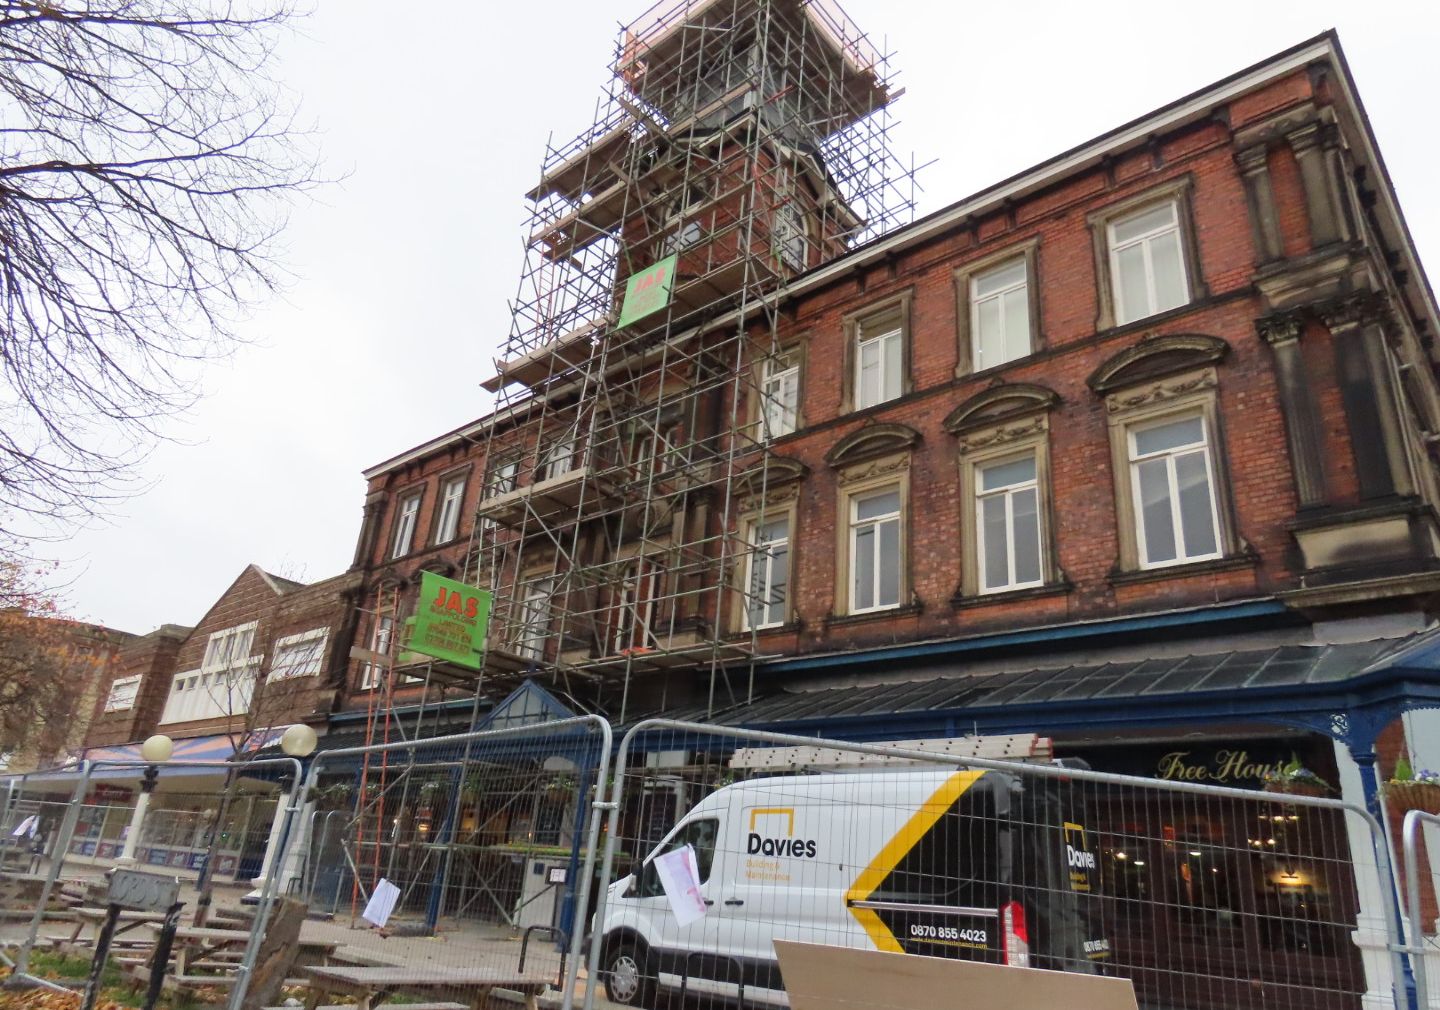 Work takes place at Wetherspoons on Lord Street in Southport. Photo by Andrew Brown Media